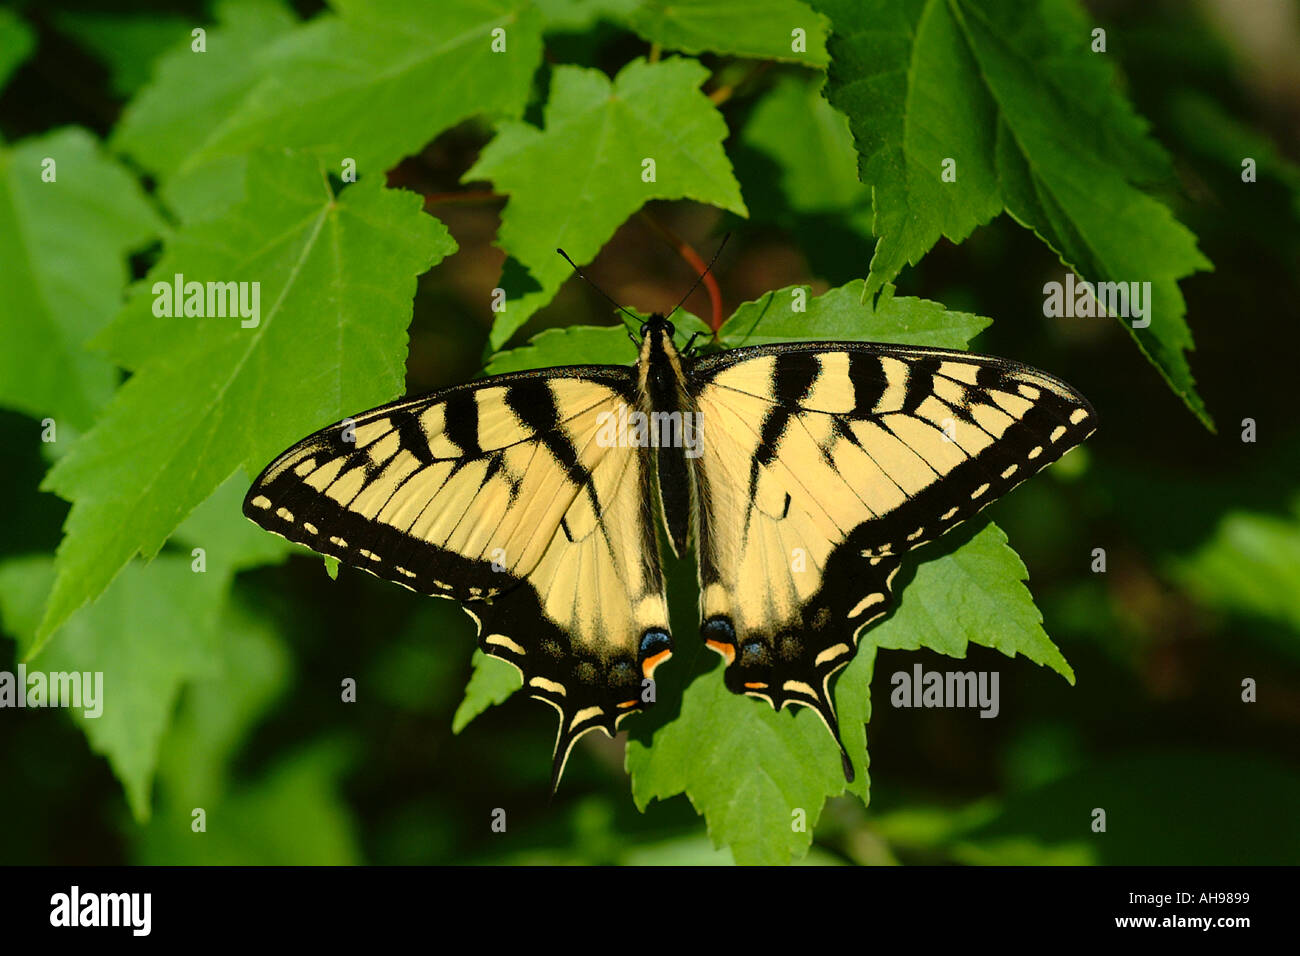 Monarch butterfly on green foliage Stock Photo